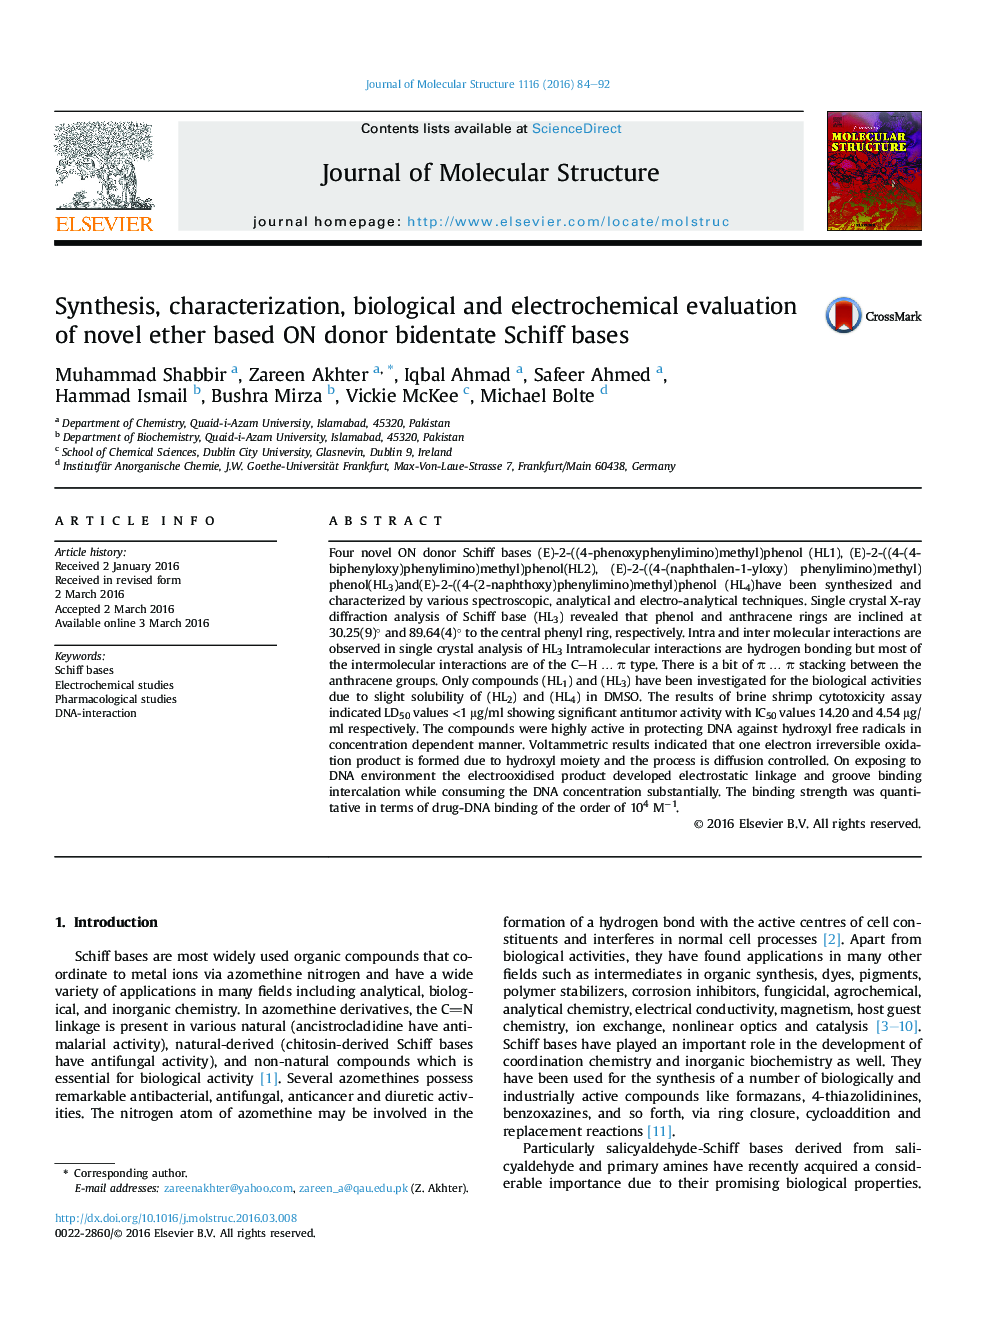 Synthesis, characterization, biological and electrochemical evaluation of novel ether based ON donor bidentate Schiff bases